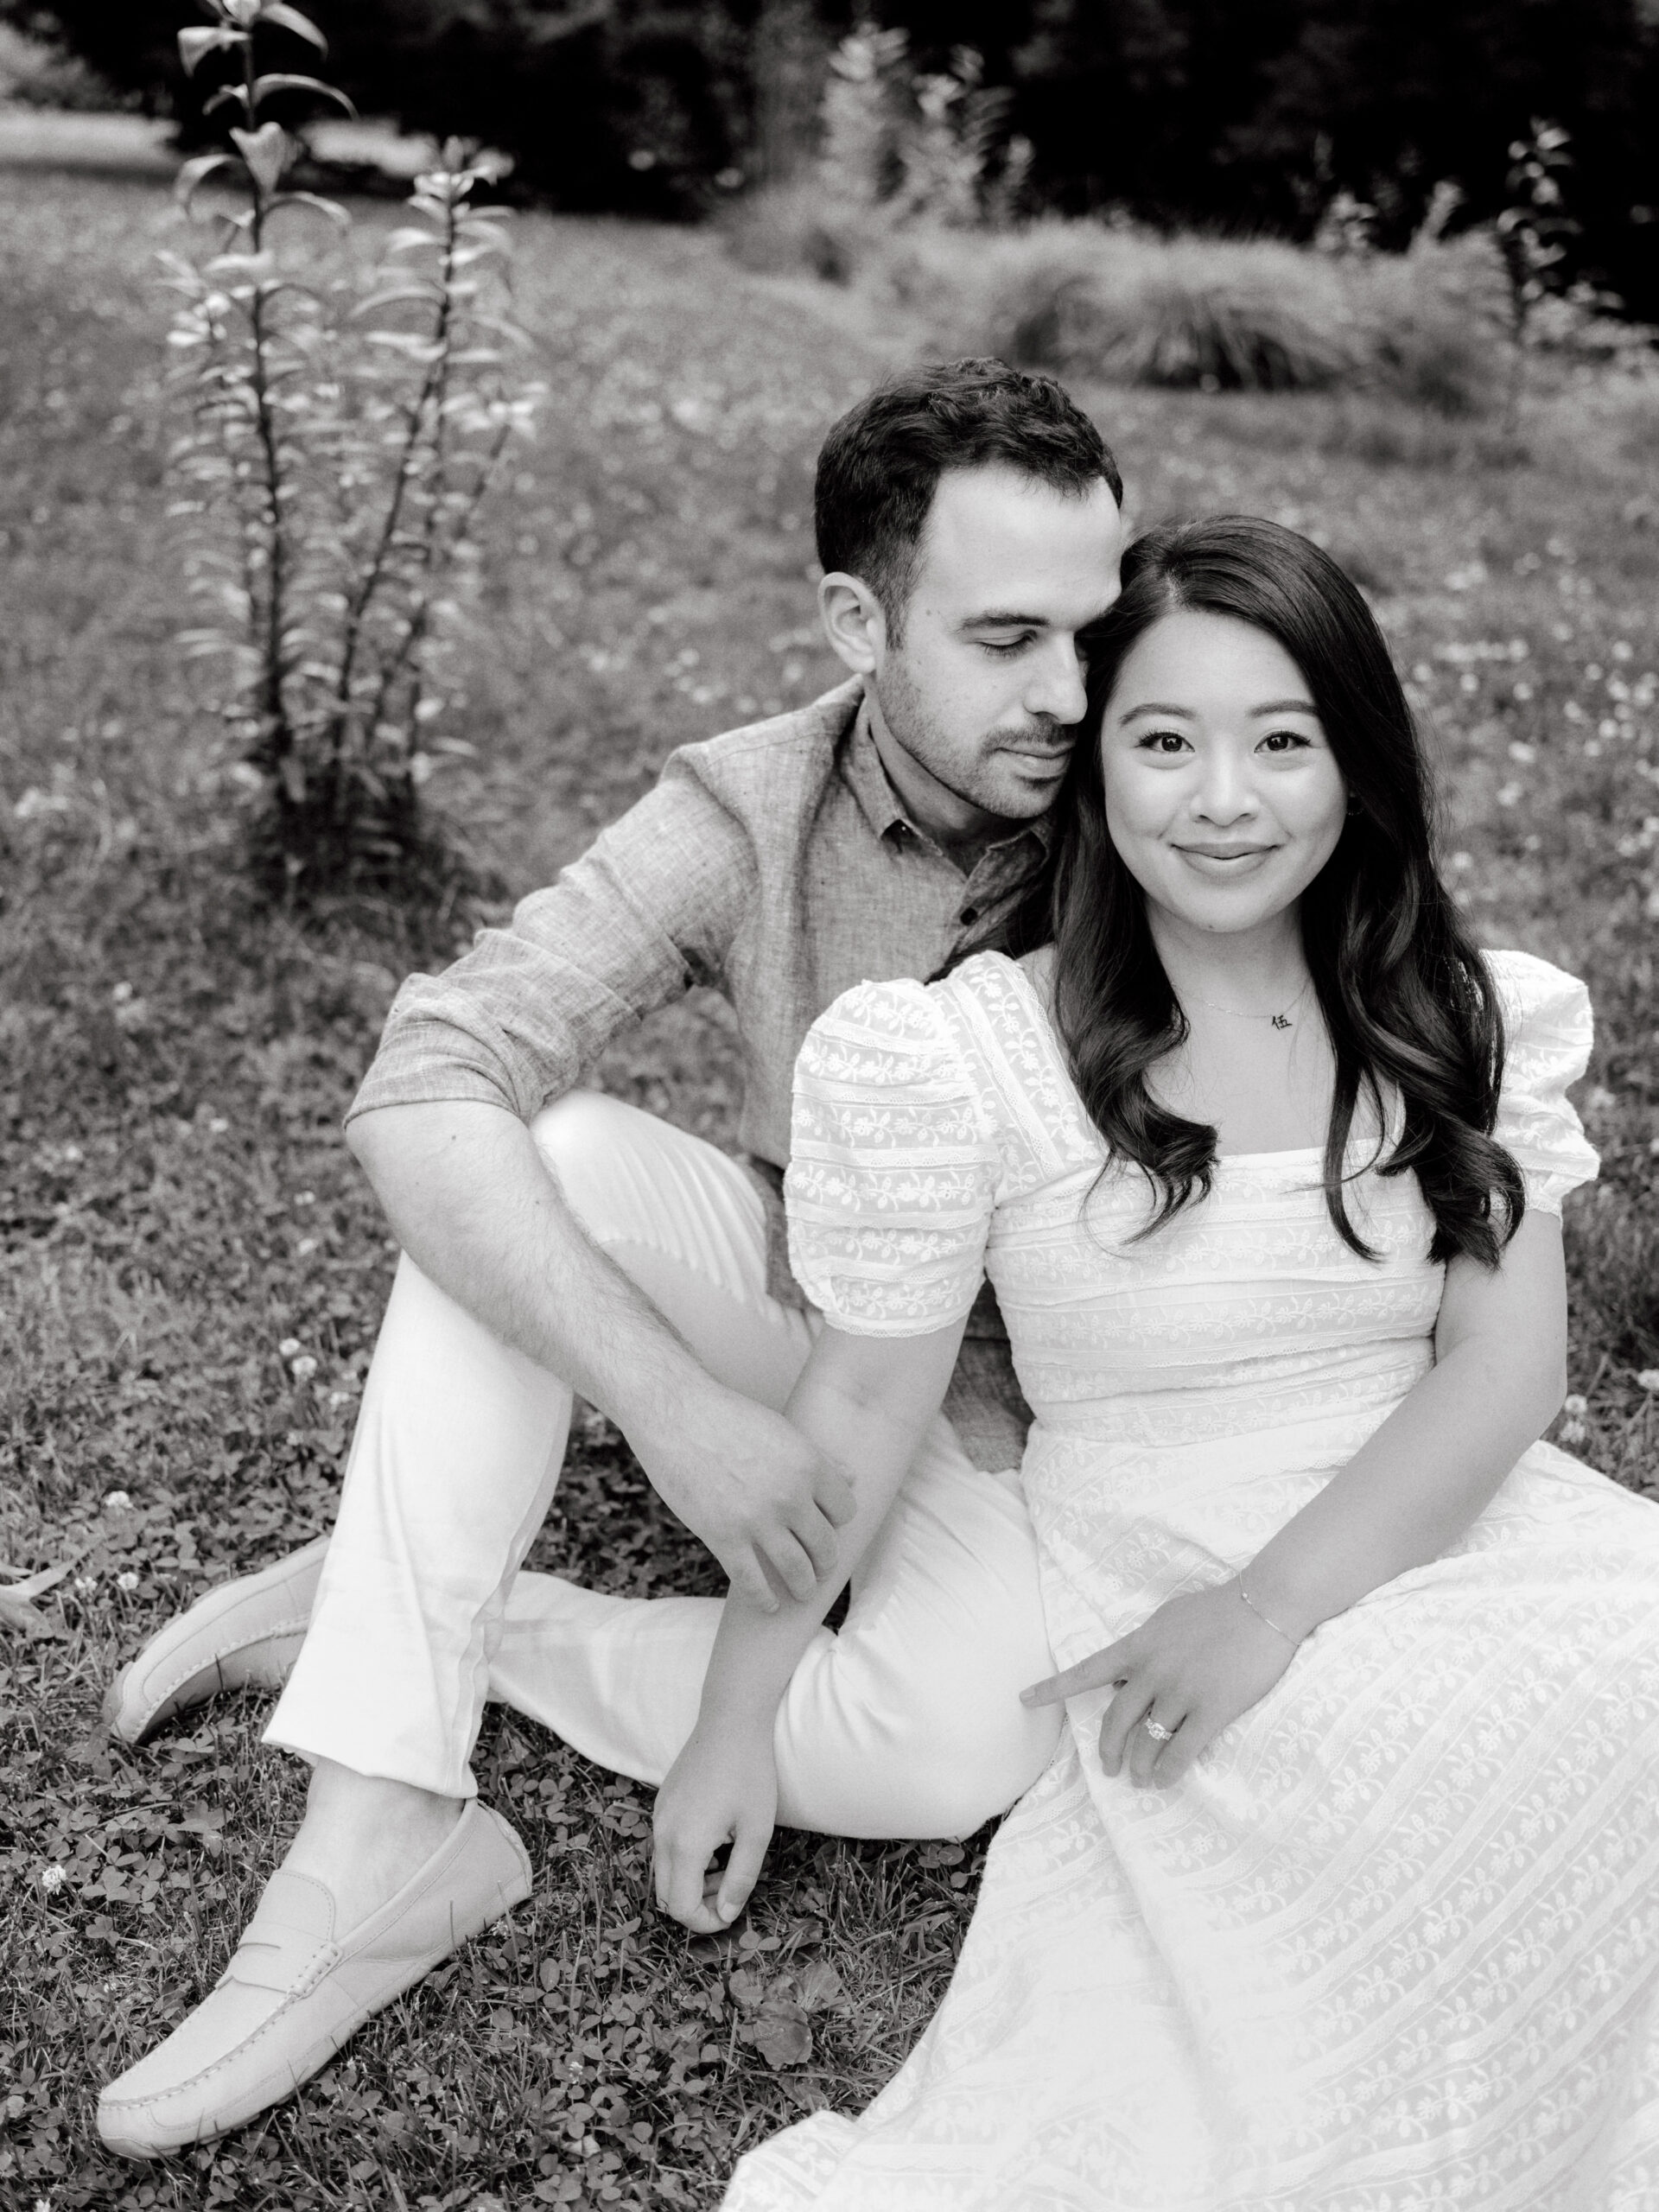 Black and white, editorial photo of the engaged couple sitting on the ground with nature in the background. Image by Jenny Fu Studio